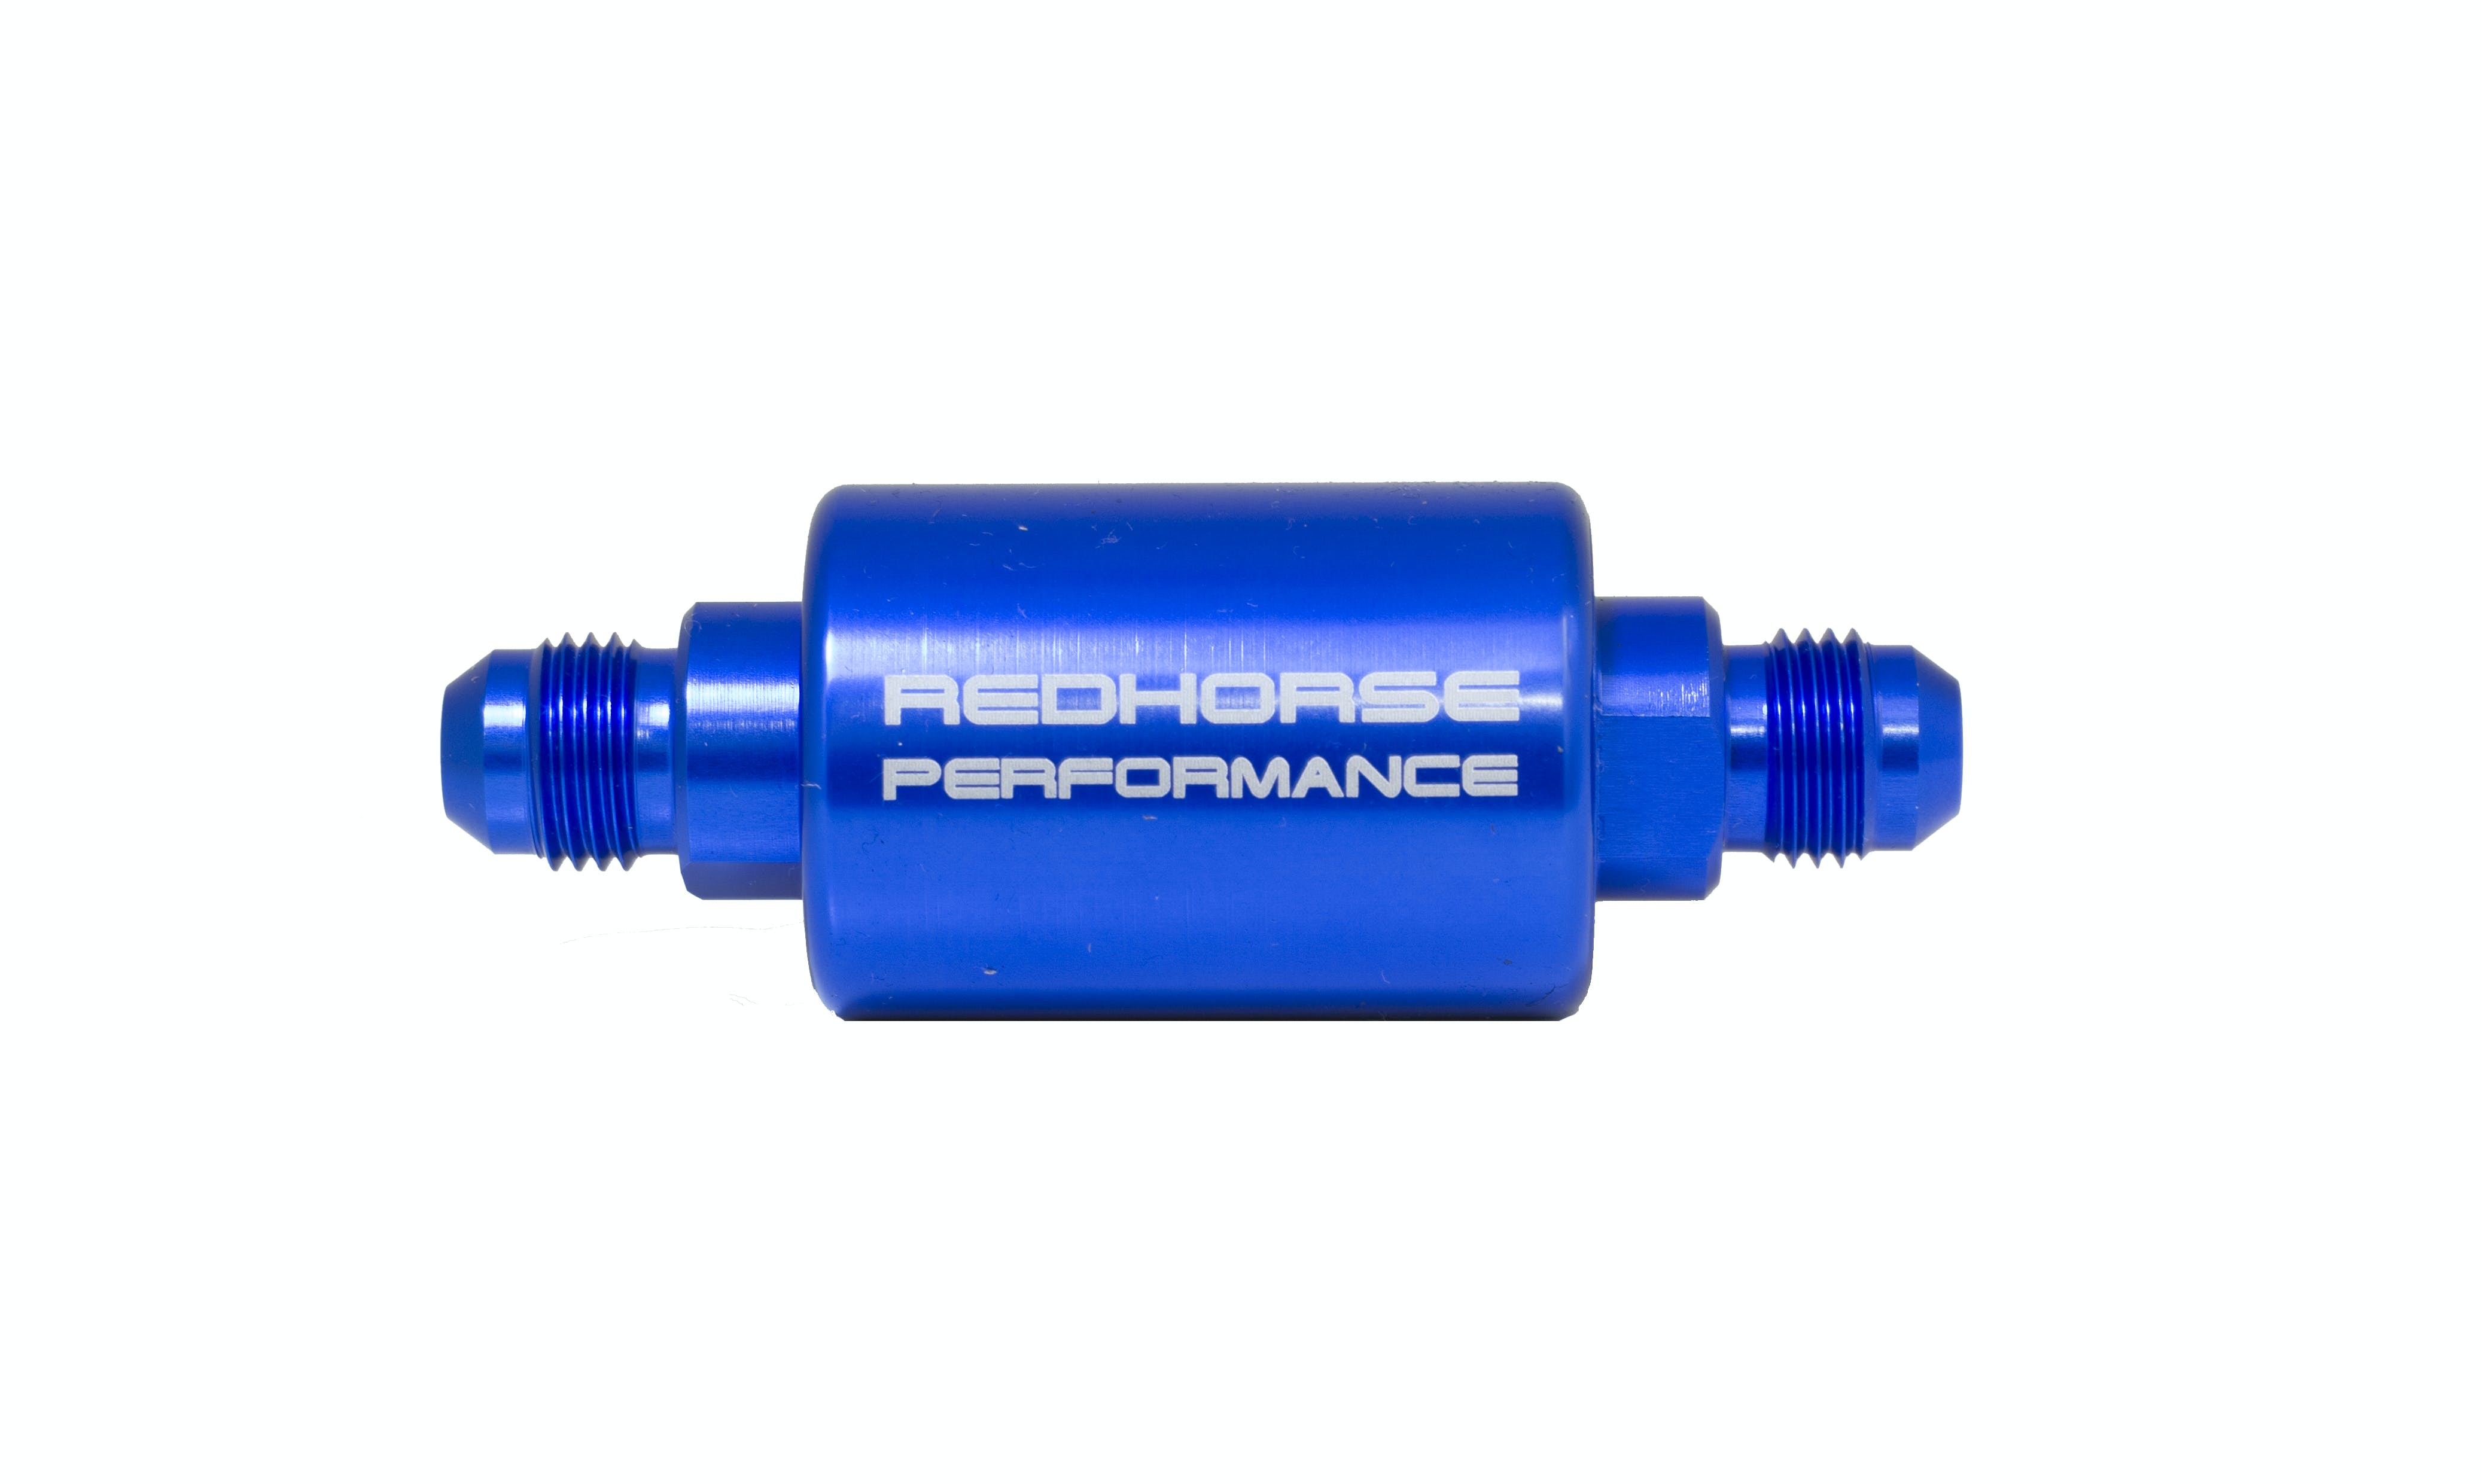 Redhorse Performance 4151-06-1 -06 inlet -06 outlet AN high flow fuel filter - blue